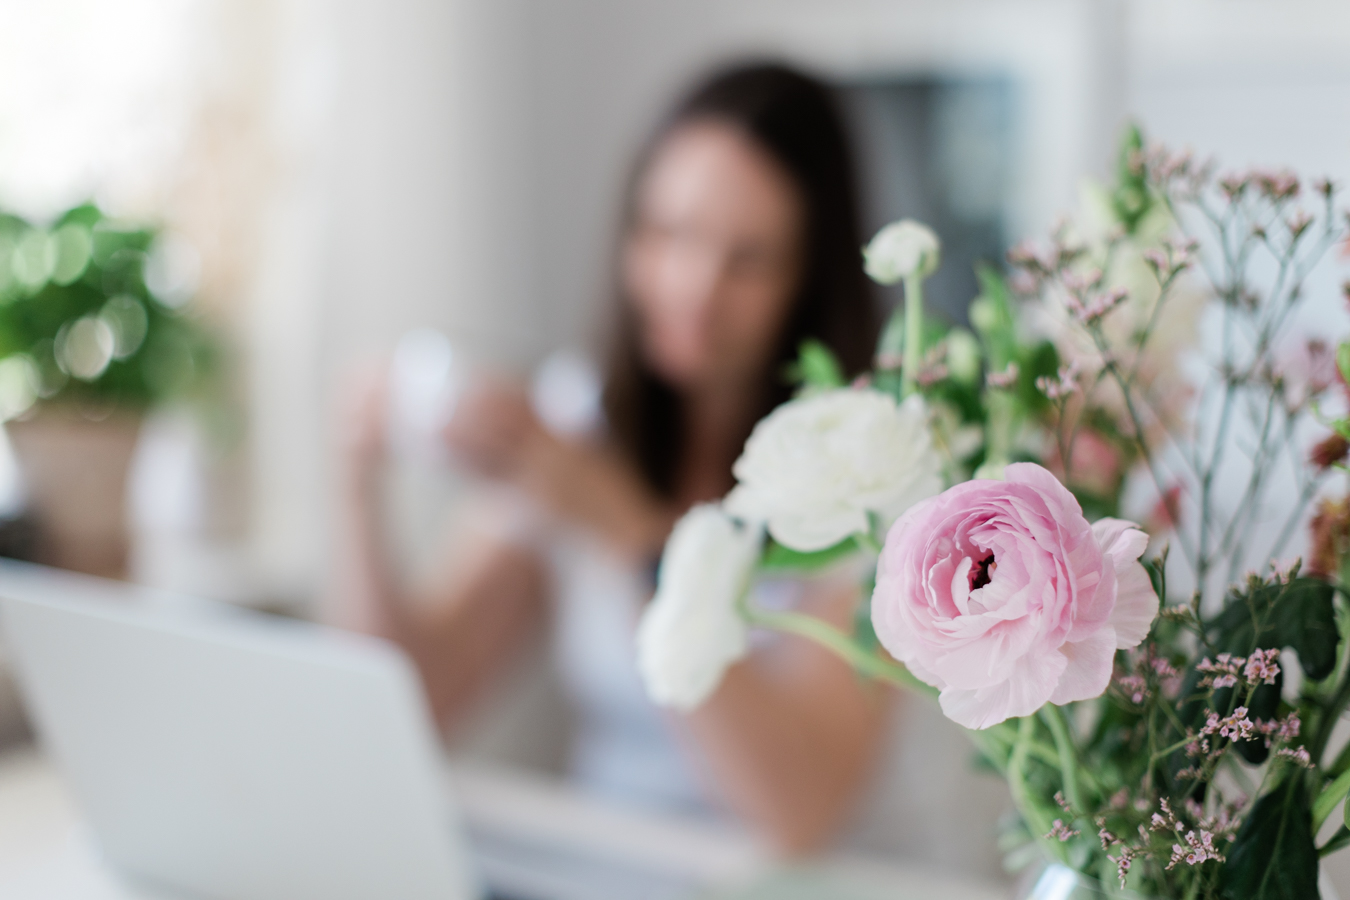 a calm photo of pink and white flowers with photographer Janine Laag blurred in the background